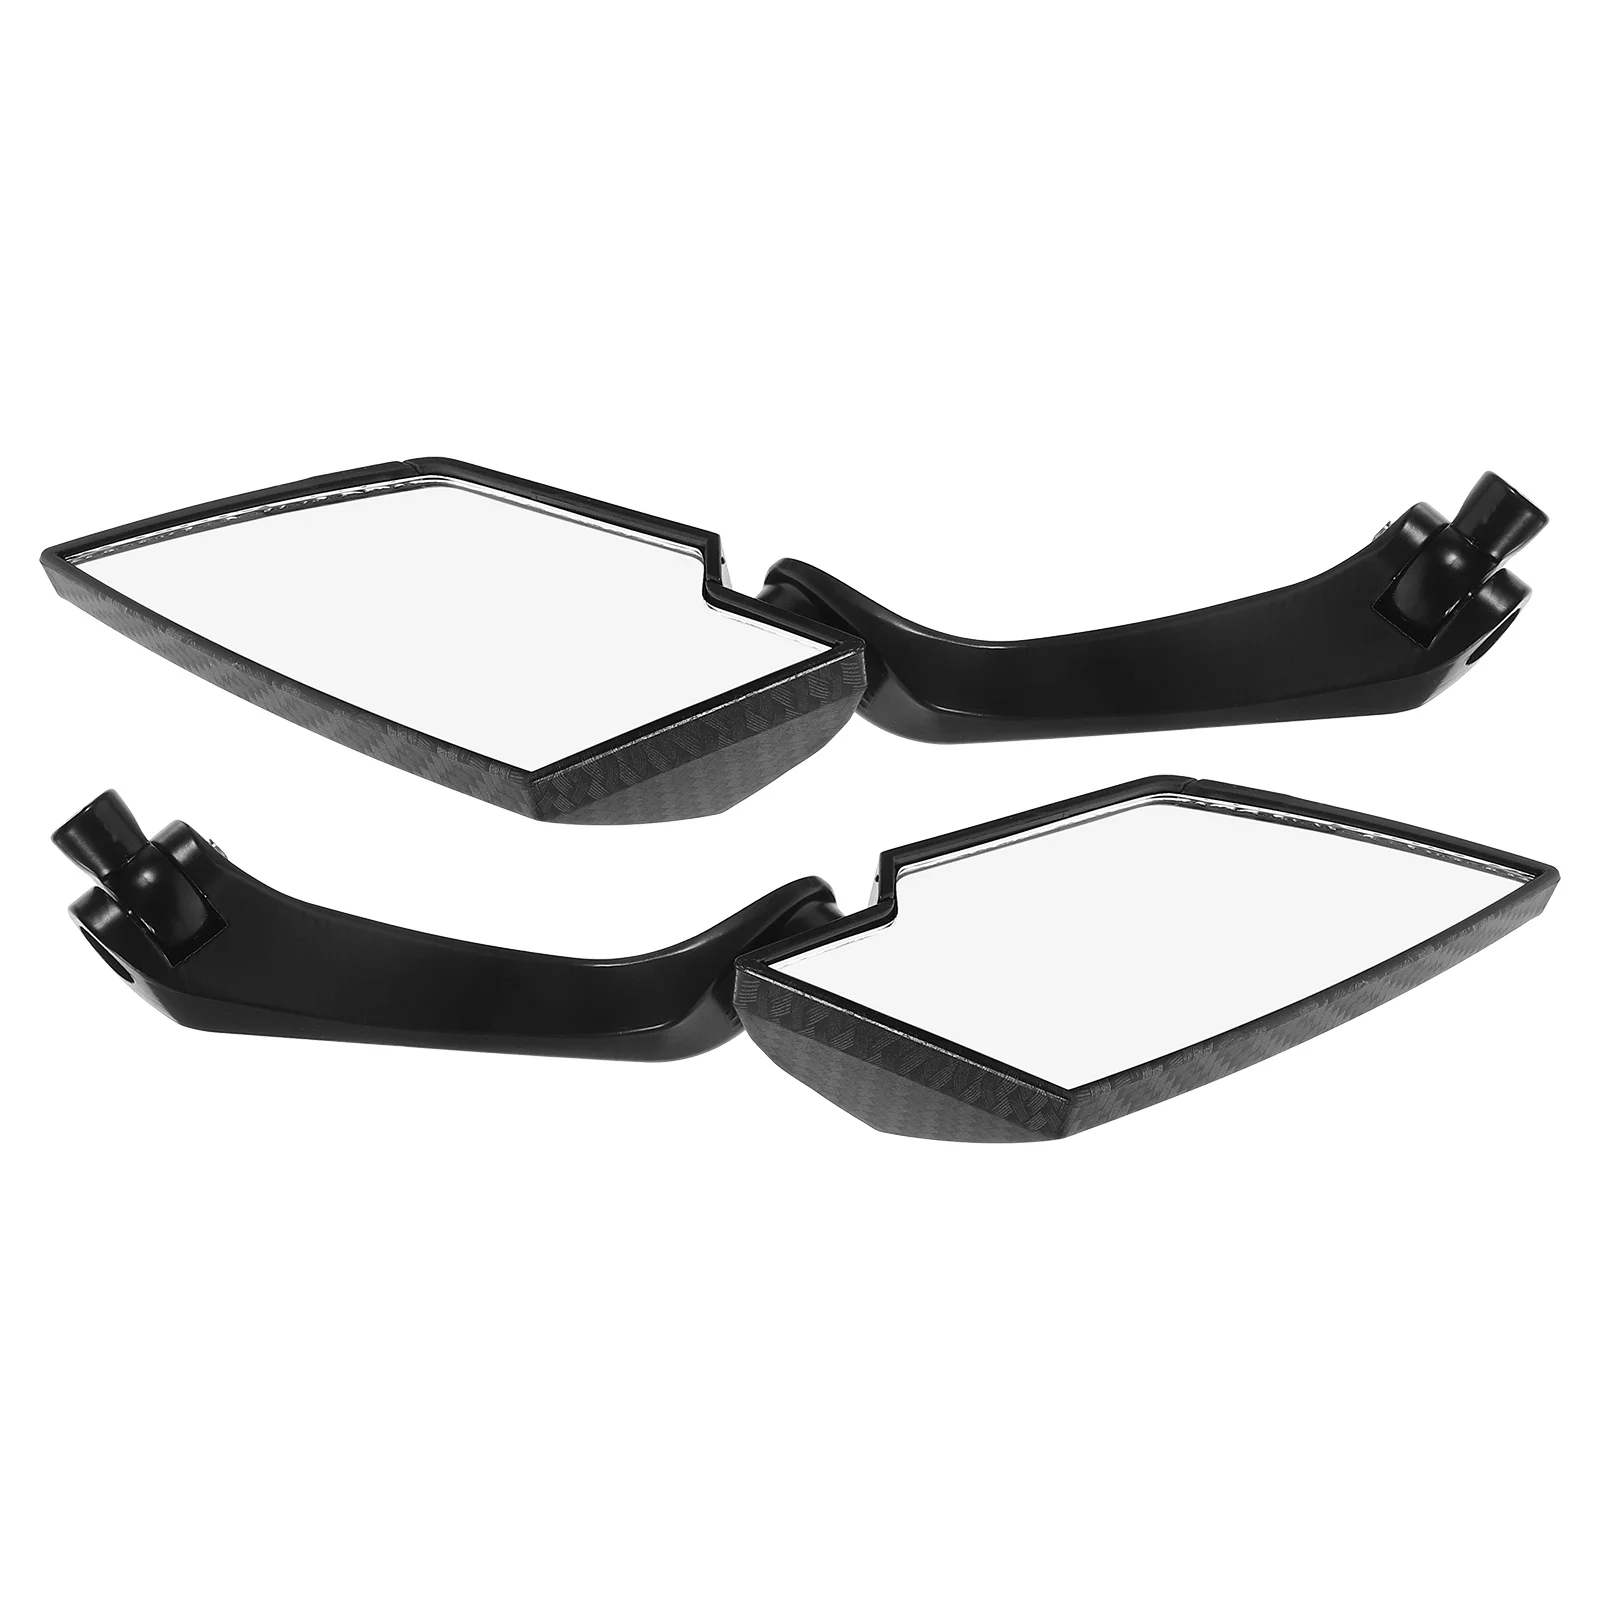 

A Pair of Universal Adjustable Motorcycle Scooter Snake Skin Pattern Aluminum Side Rear View Mirrors (Black)